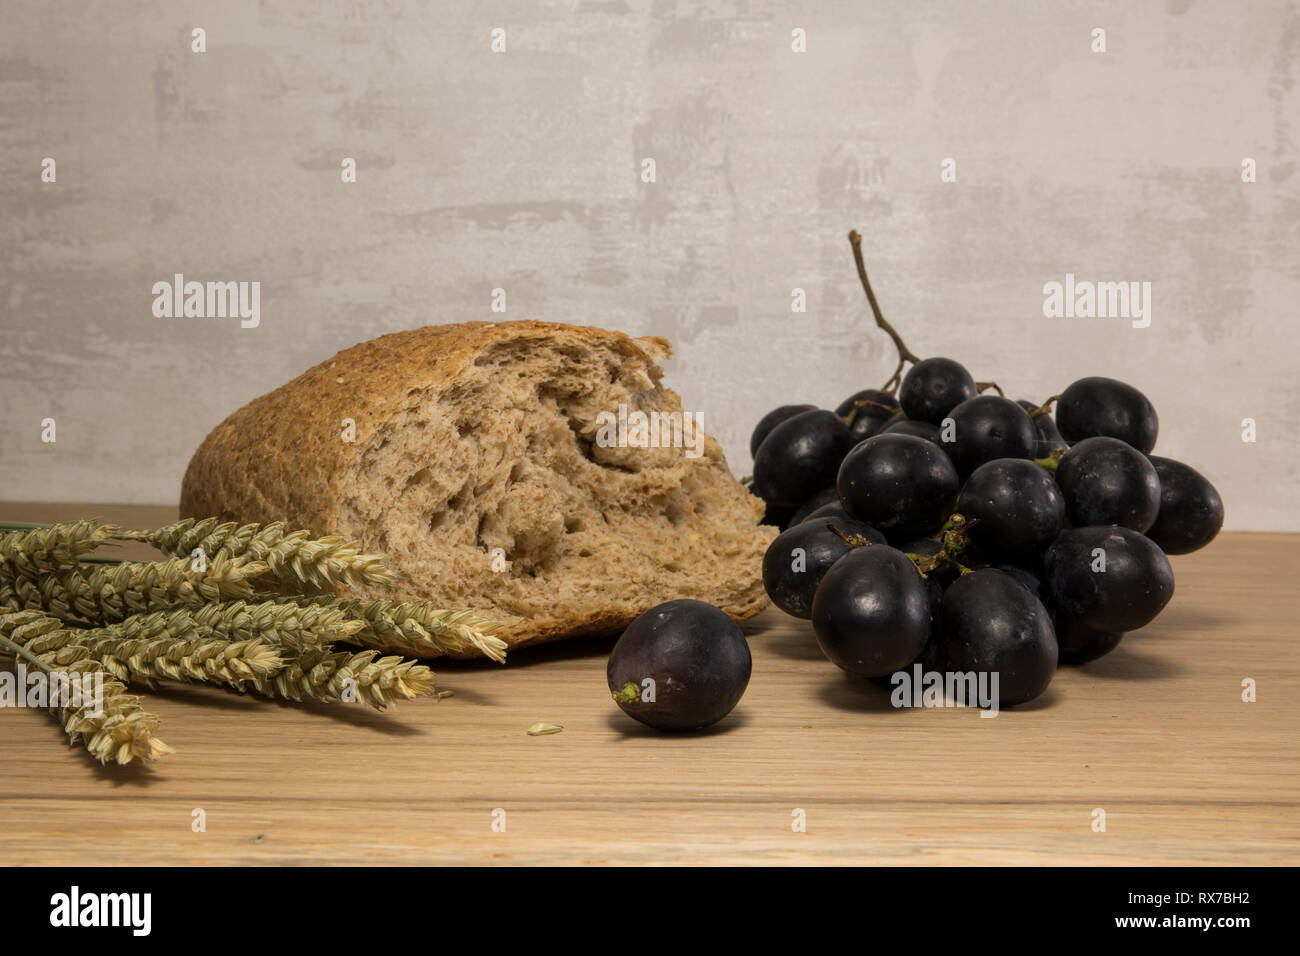 A wheat bread and shock of wheat with red grapes as easter lst supper background Stock Photo